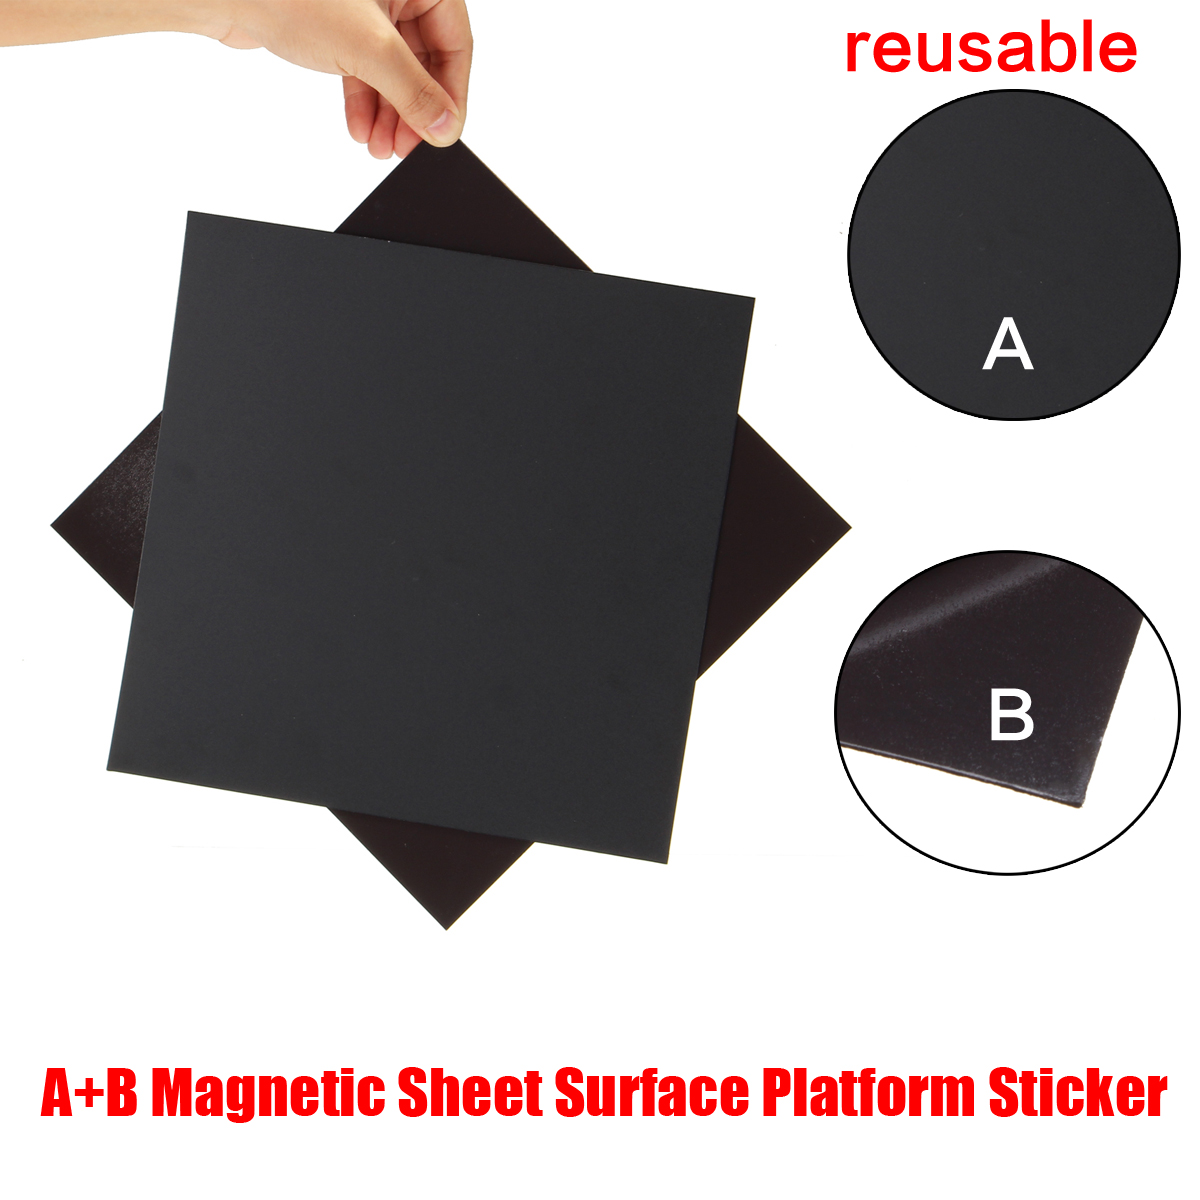 22x22cm A+B Magnetic Sheet Surface Platform Sticker For 3D Printer Creality Ender-3 Heated Bed 39